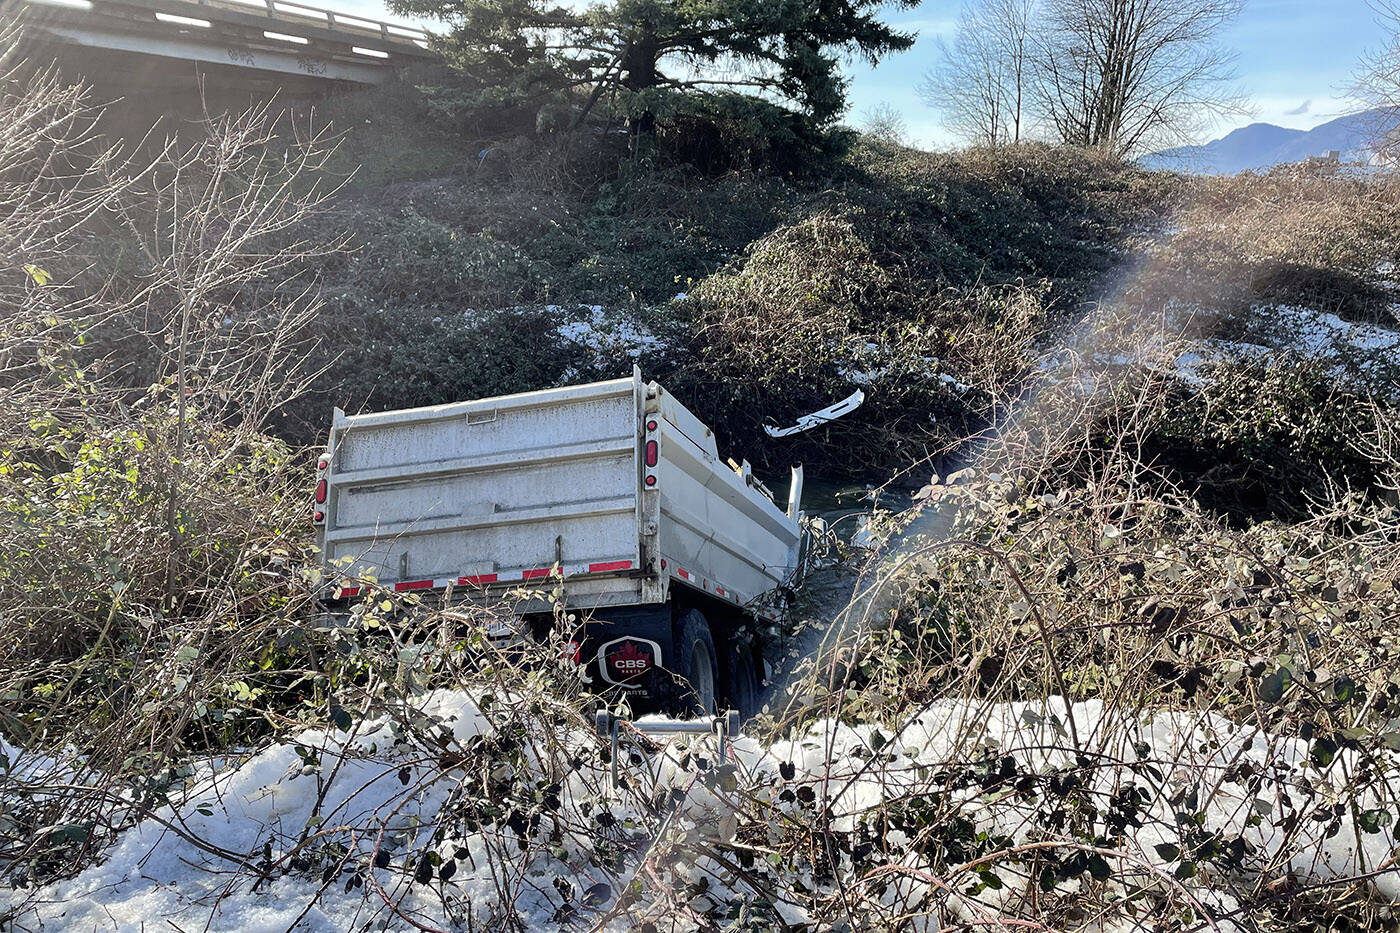 This dump truck landed in a ditch filled with frigid water after it left the Highway 1 offramp at Young Road on Friday, Jan. 14, 2022. (Cheryl Calhoun)